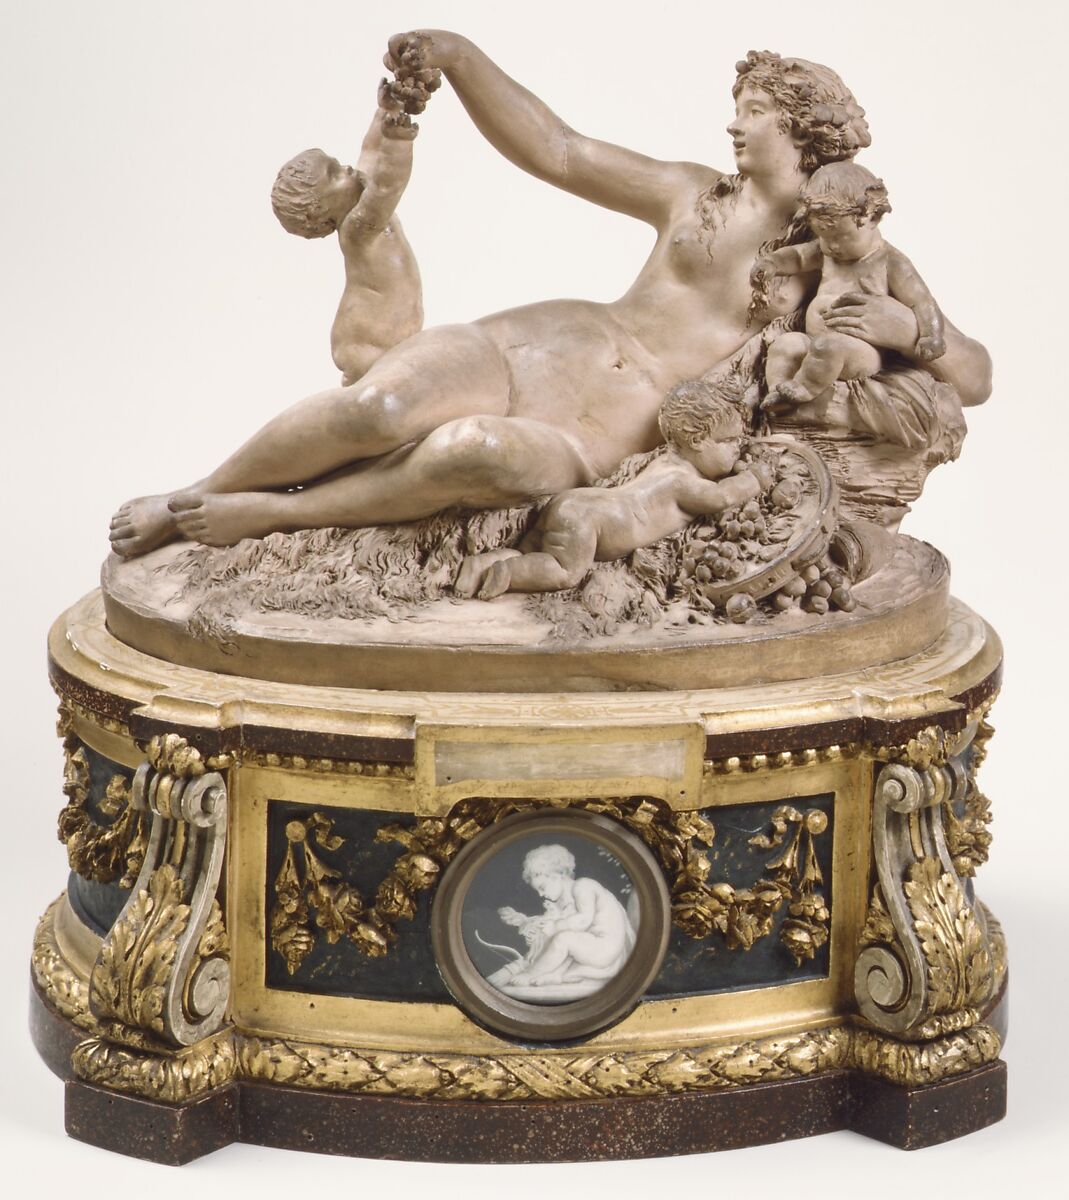 Bacchante with grapes and three infants, Joseph-Charles Marin (French, Paris 1759–1834 Paris), Terracotta, on painted and gilt wood pedestal, French, Paris 